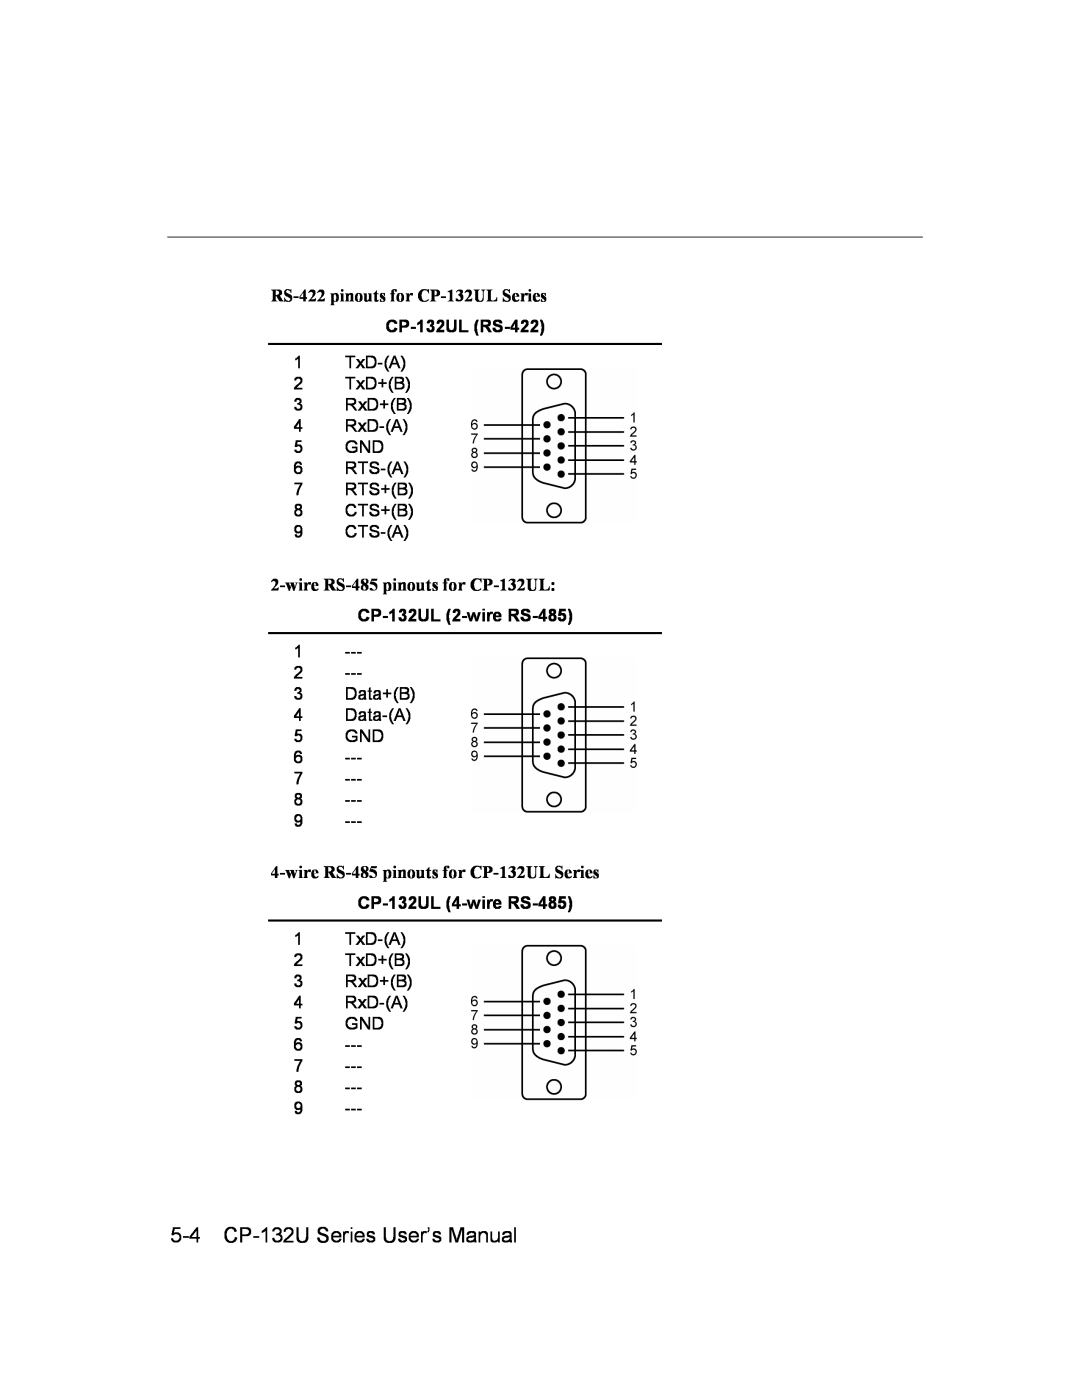 Moxa Technologies user manual 5-4 CP-132U Series User’s Manual, RS-422 pinouts for CP-132UL Series, CP-132UL RS-422 